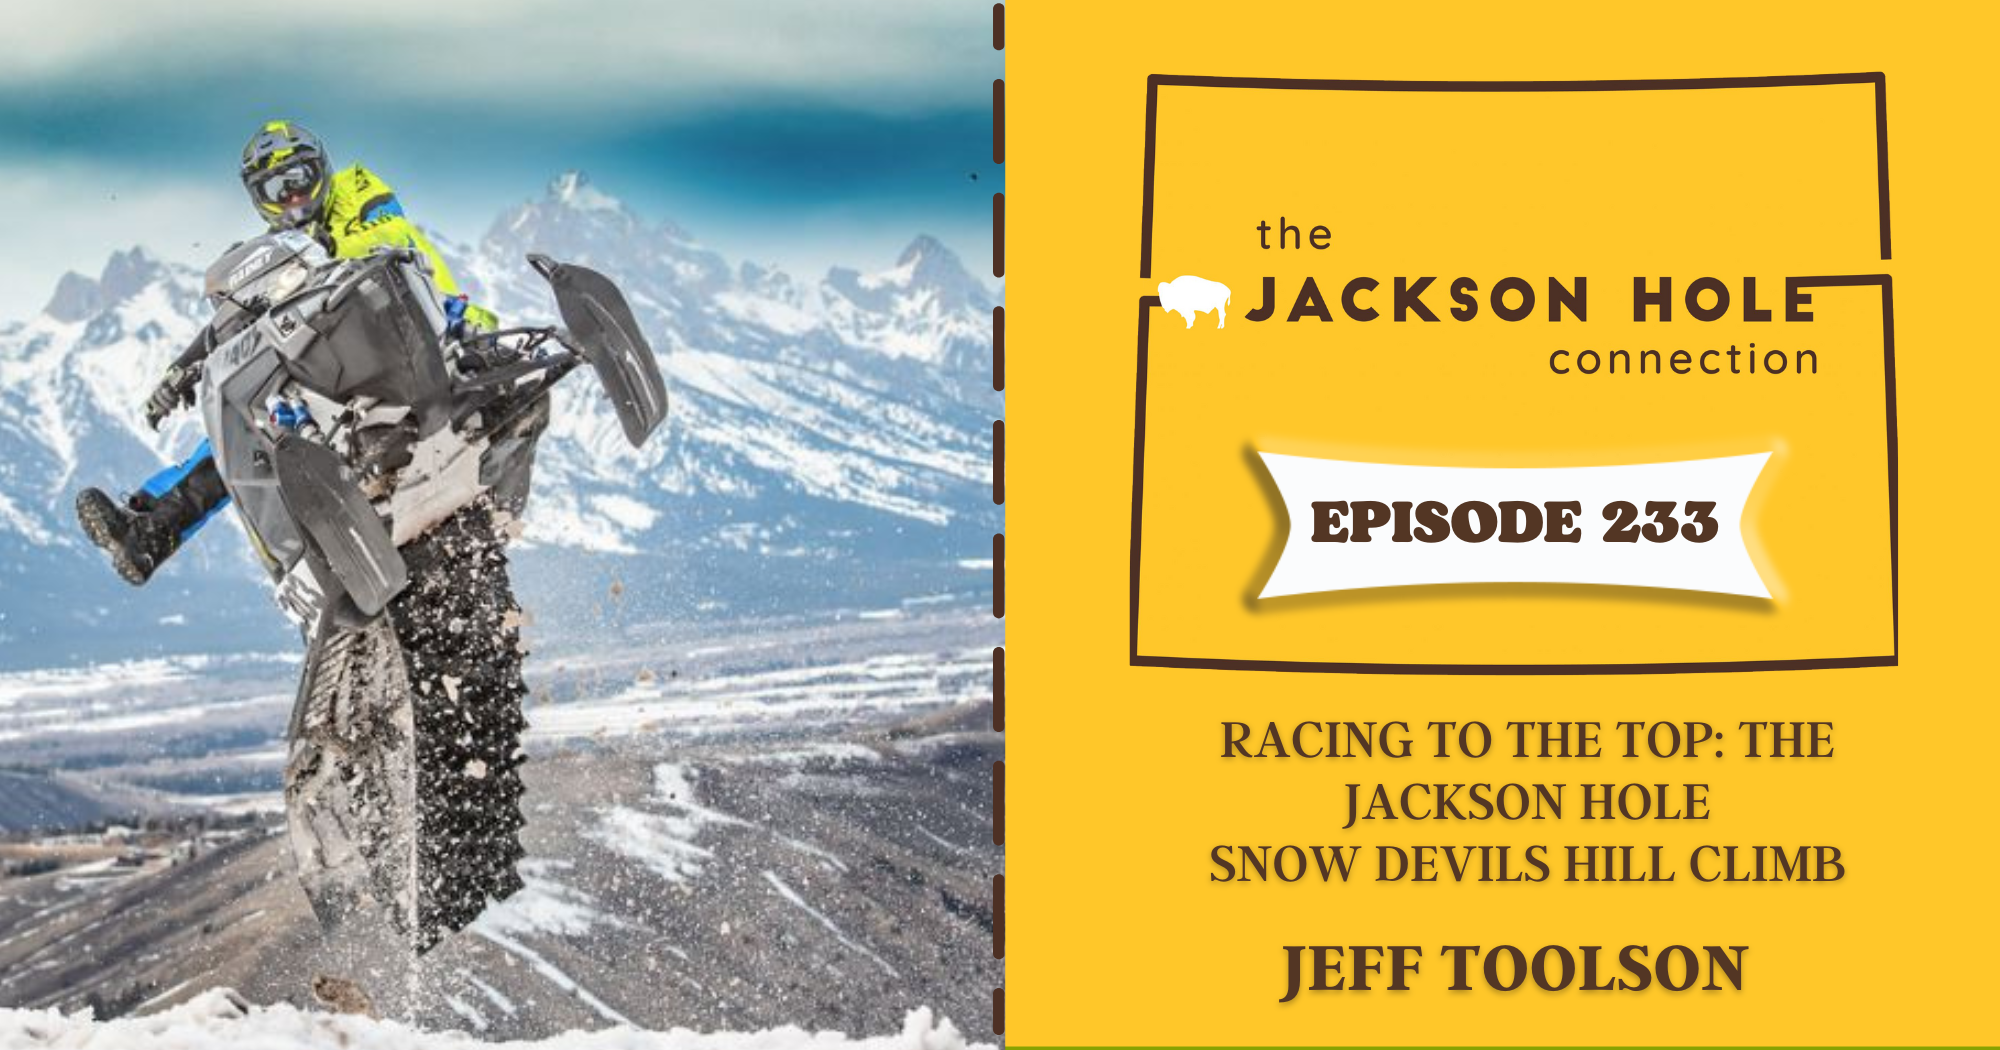 Episode 233 - Racing to the Top: The Jackson Hole Snow Devils Hill